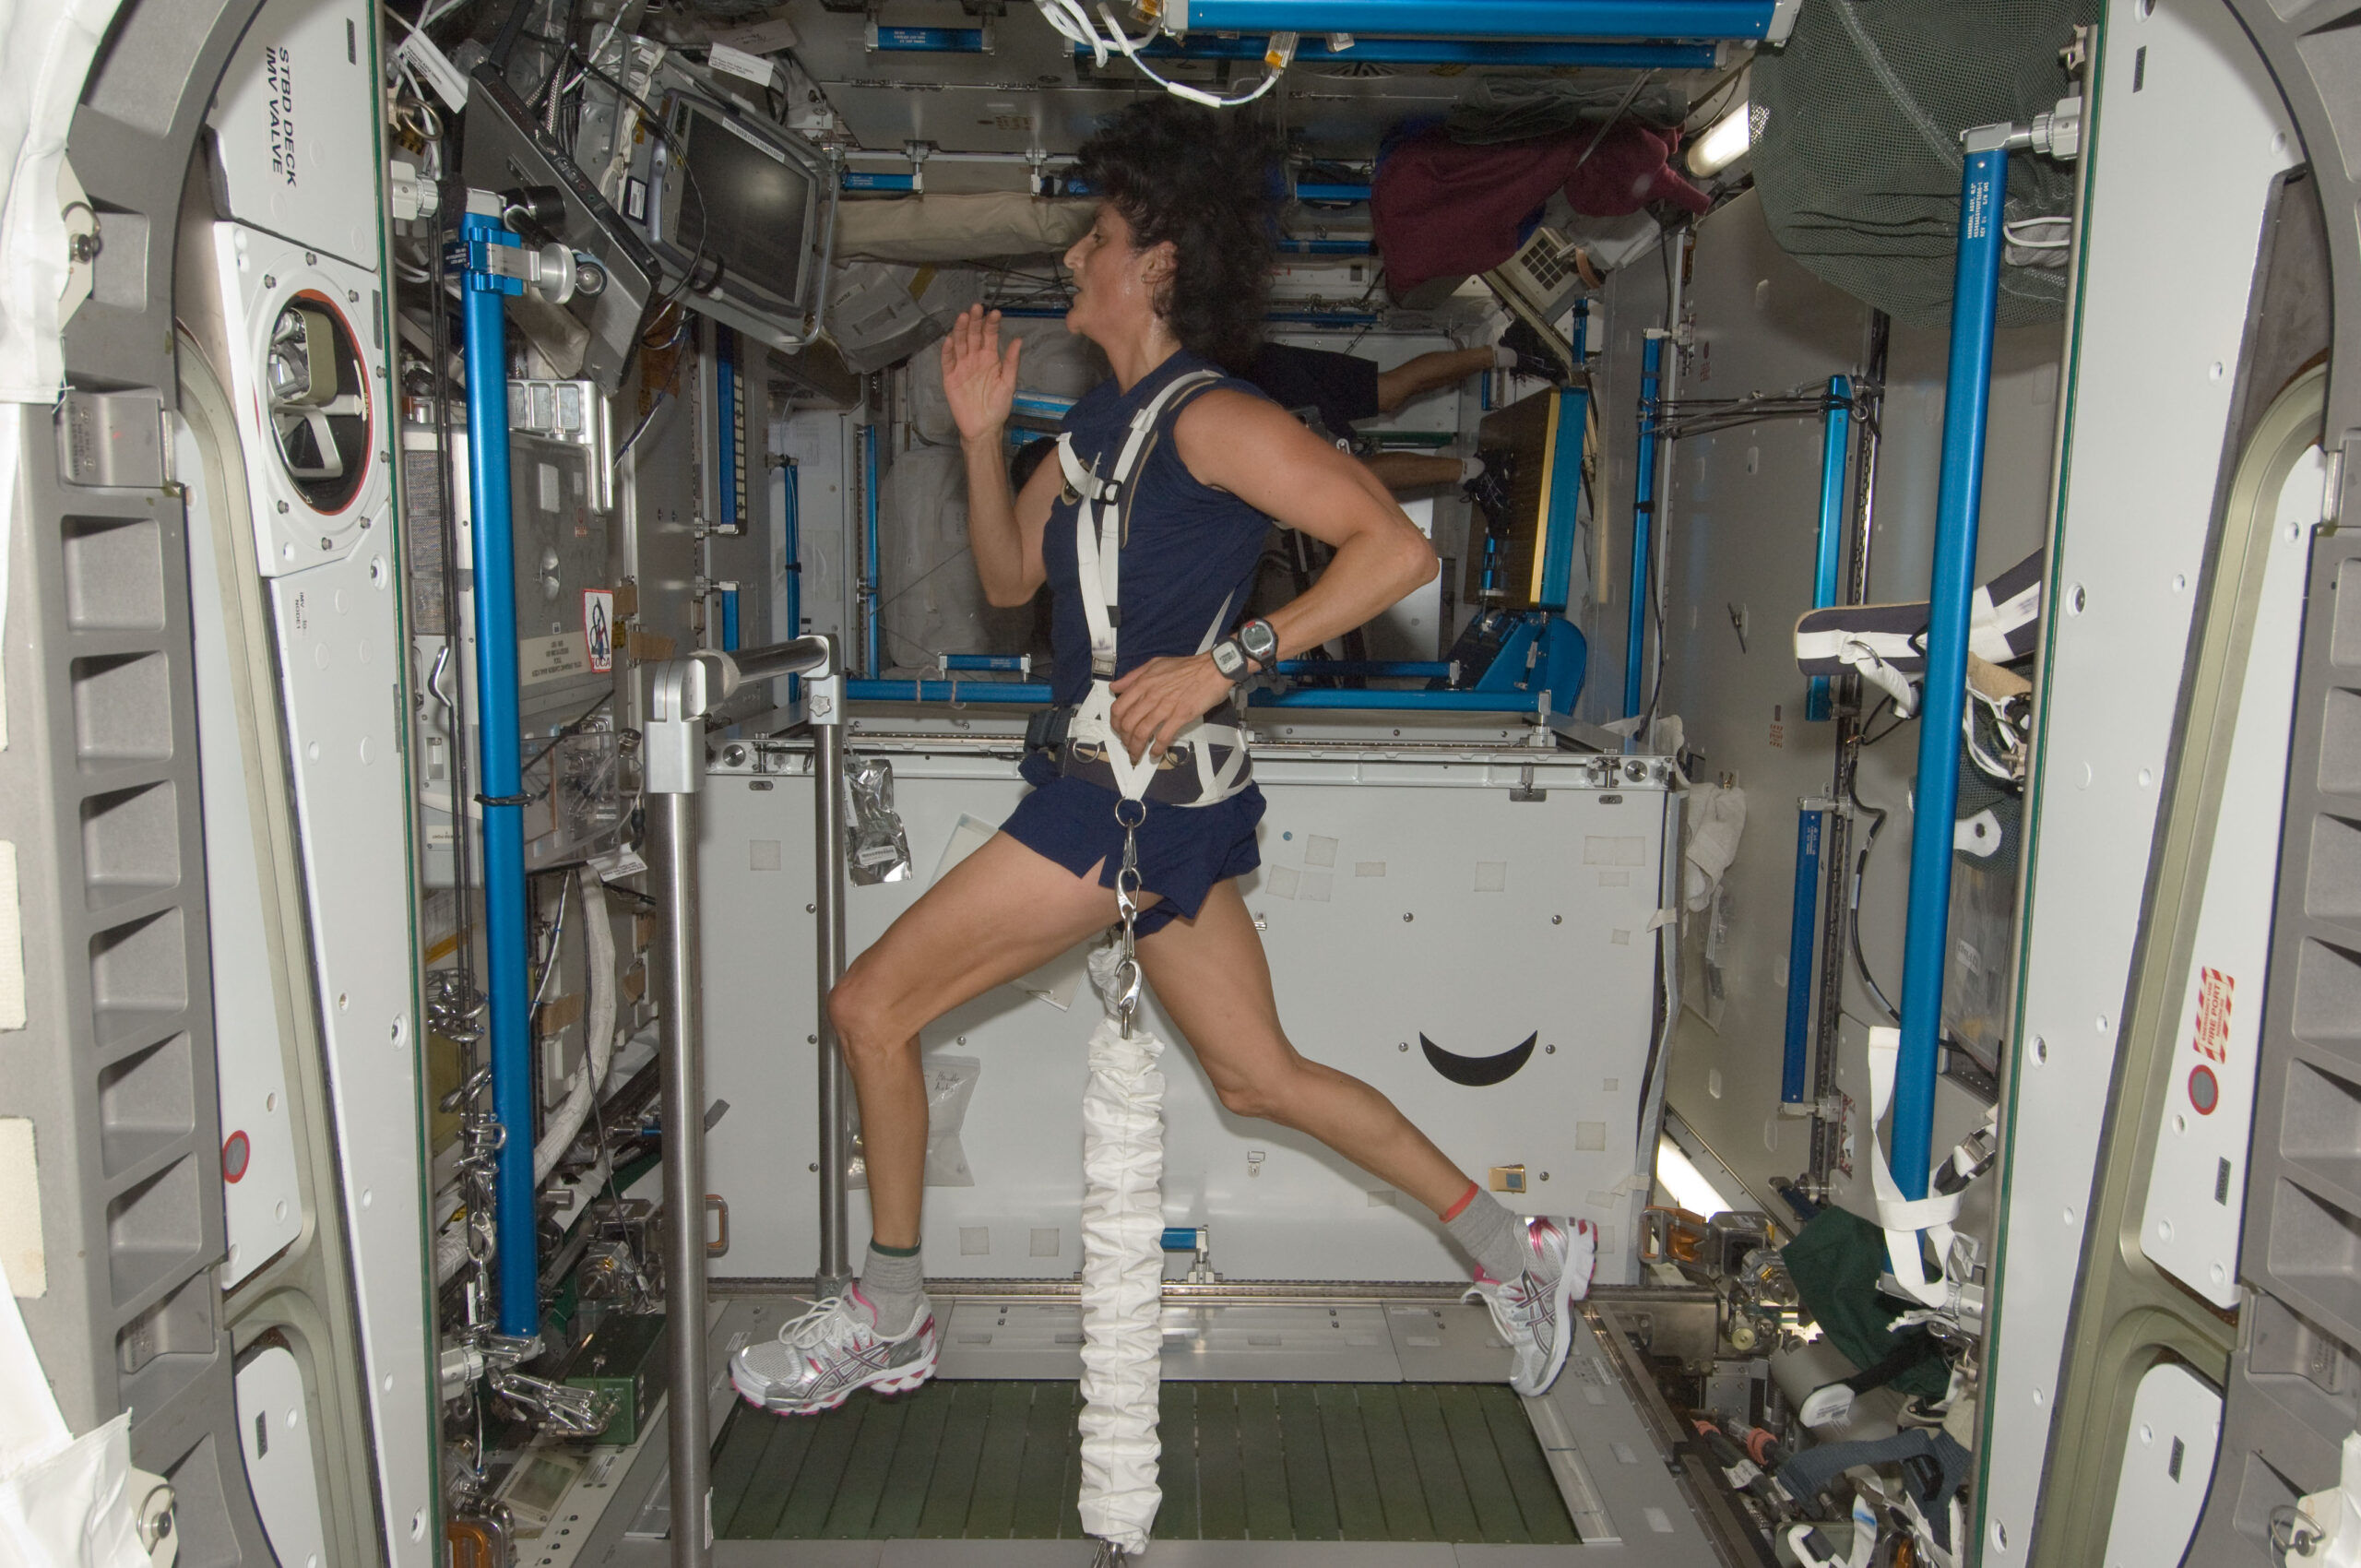 History of Marathons in Space – Two confirmed Marathons